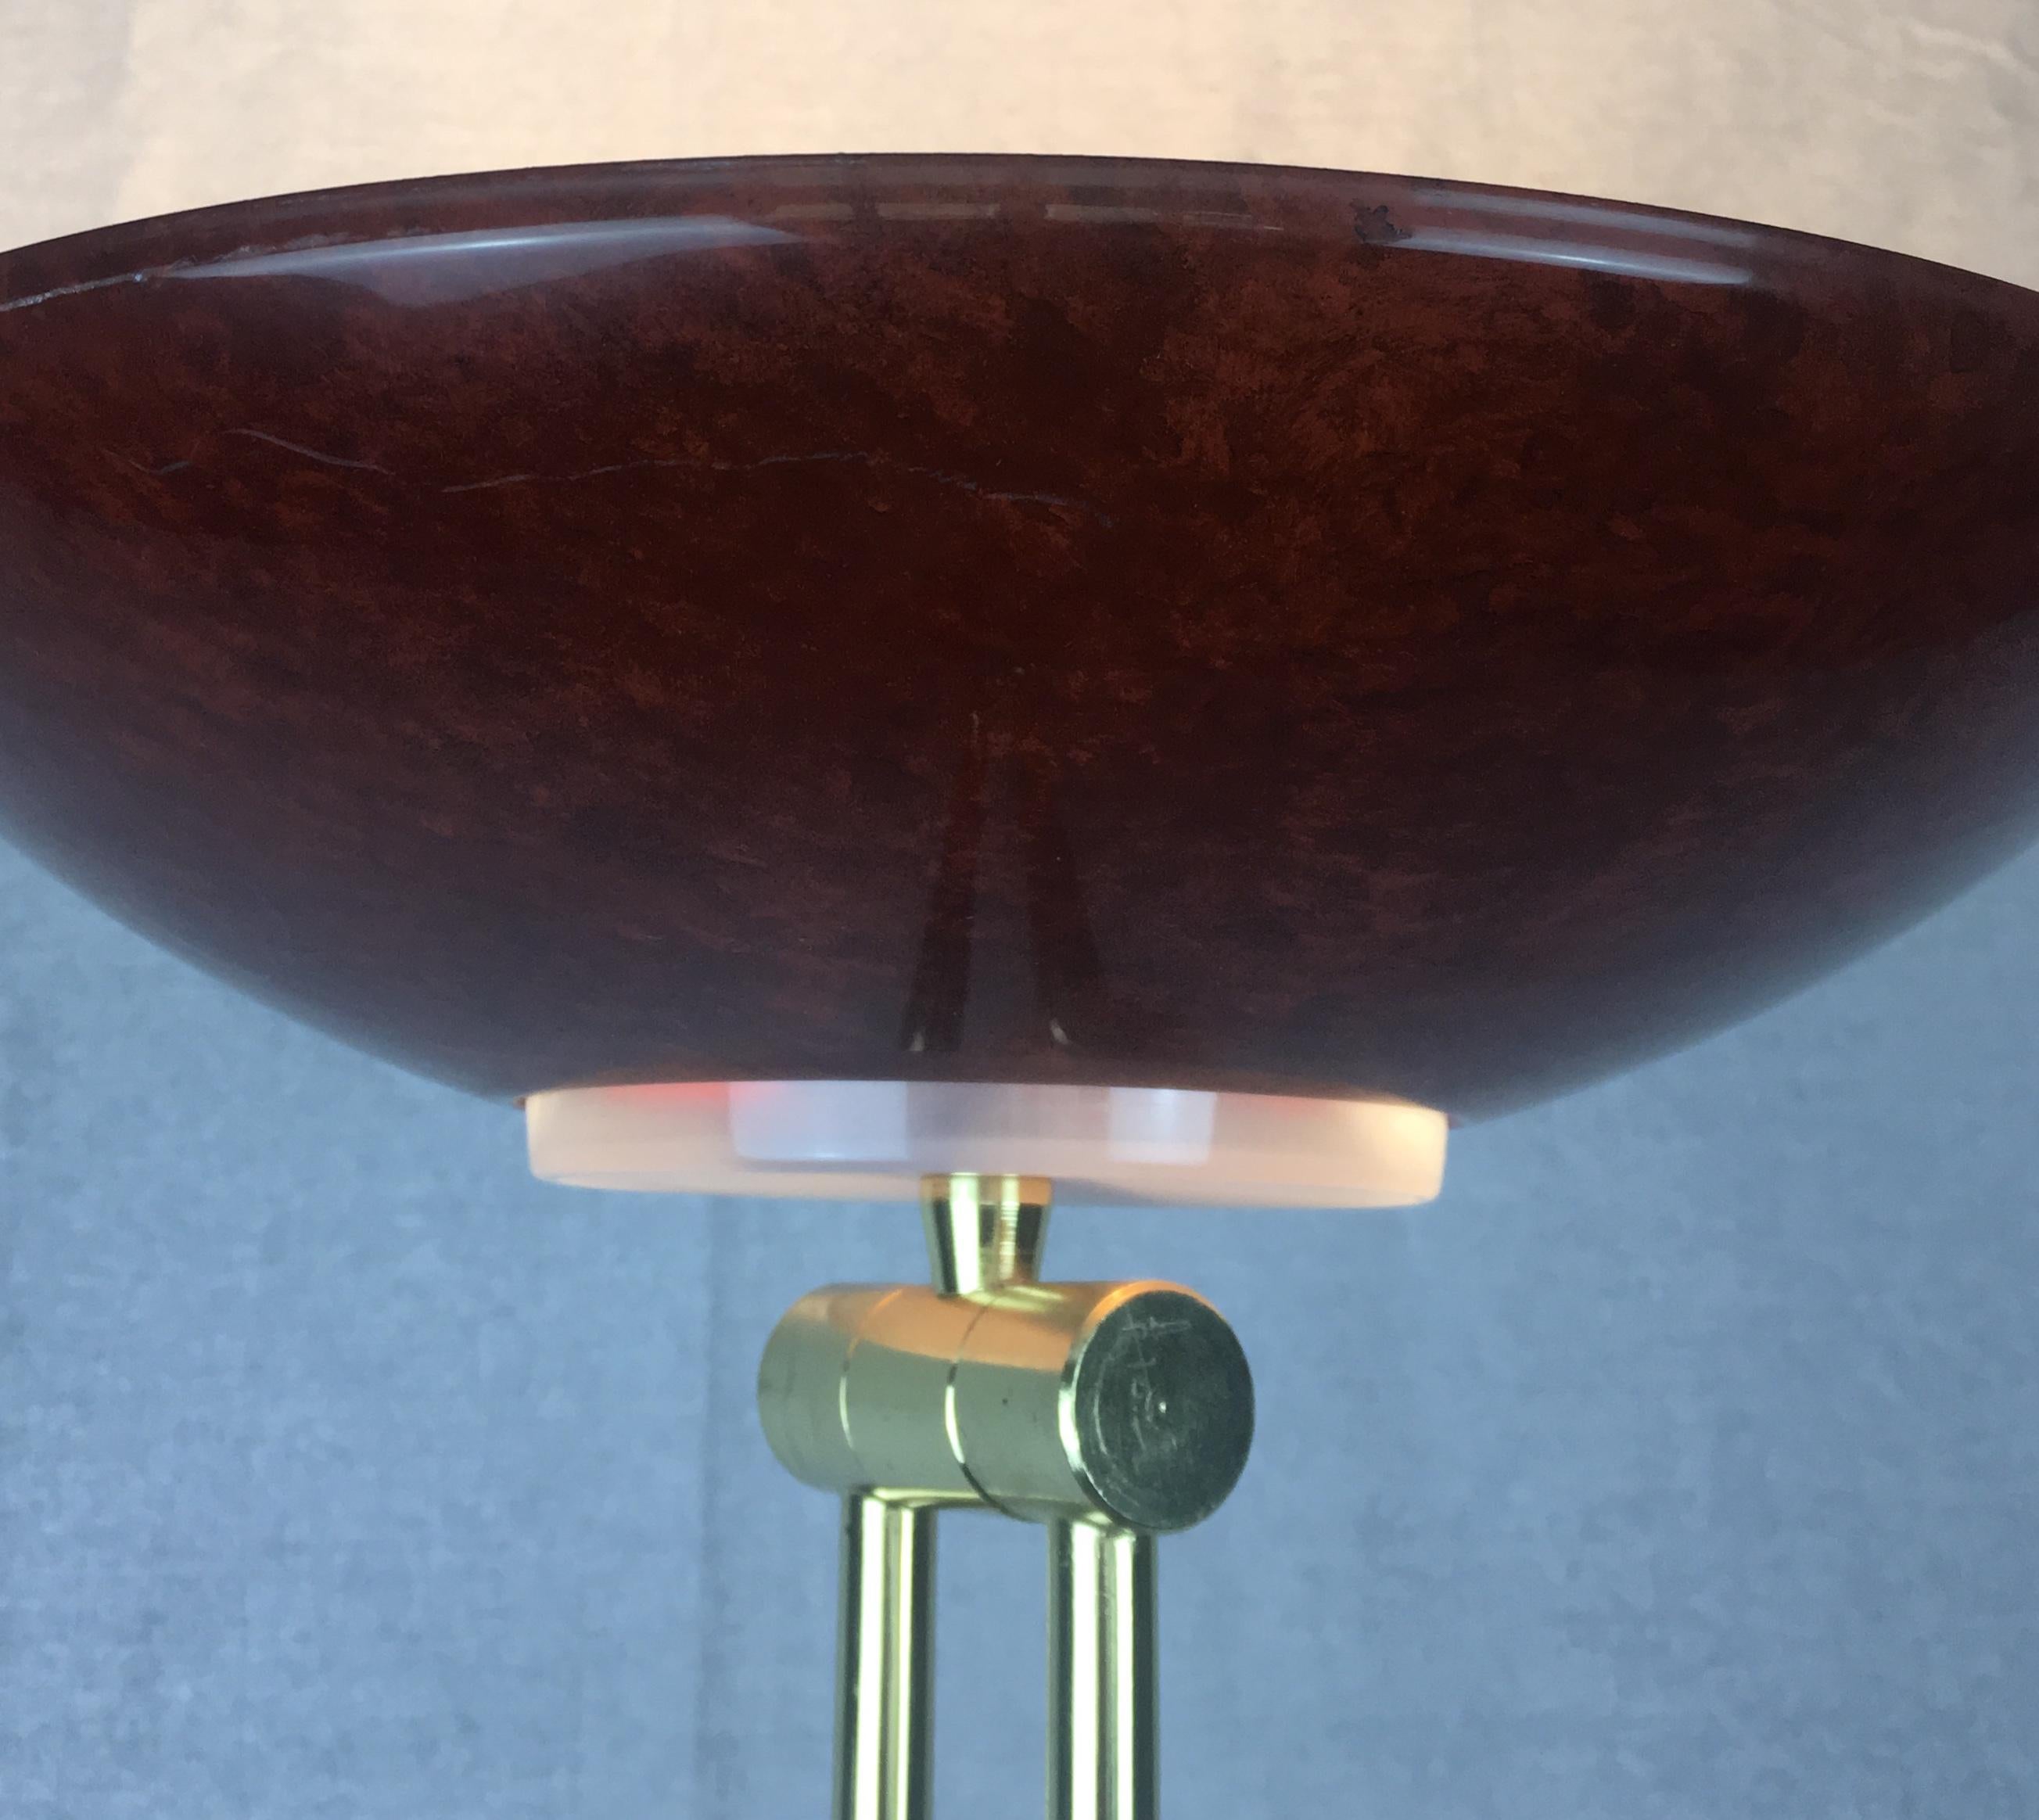 Striking postmodern articulated floor lamp, circa 1980s-1990s. This stunning French artisan crafted sculptural metal standing lamp is accented with brass fittings and designed with articulating joints, allowing for directional lighting.

Various